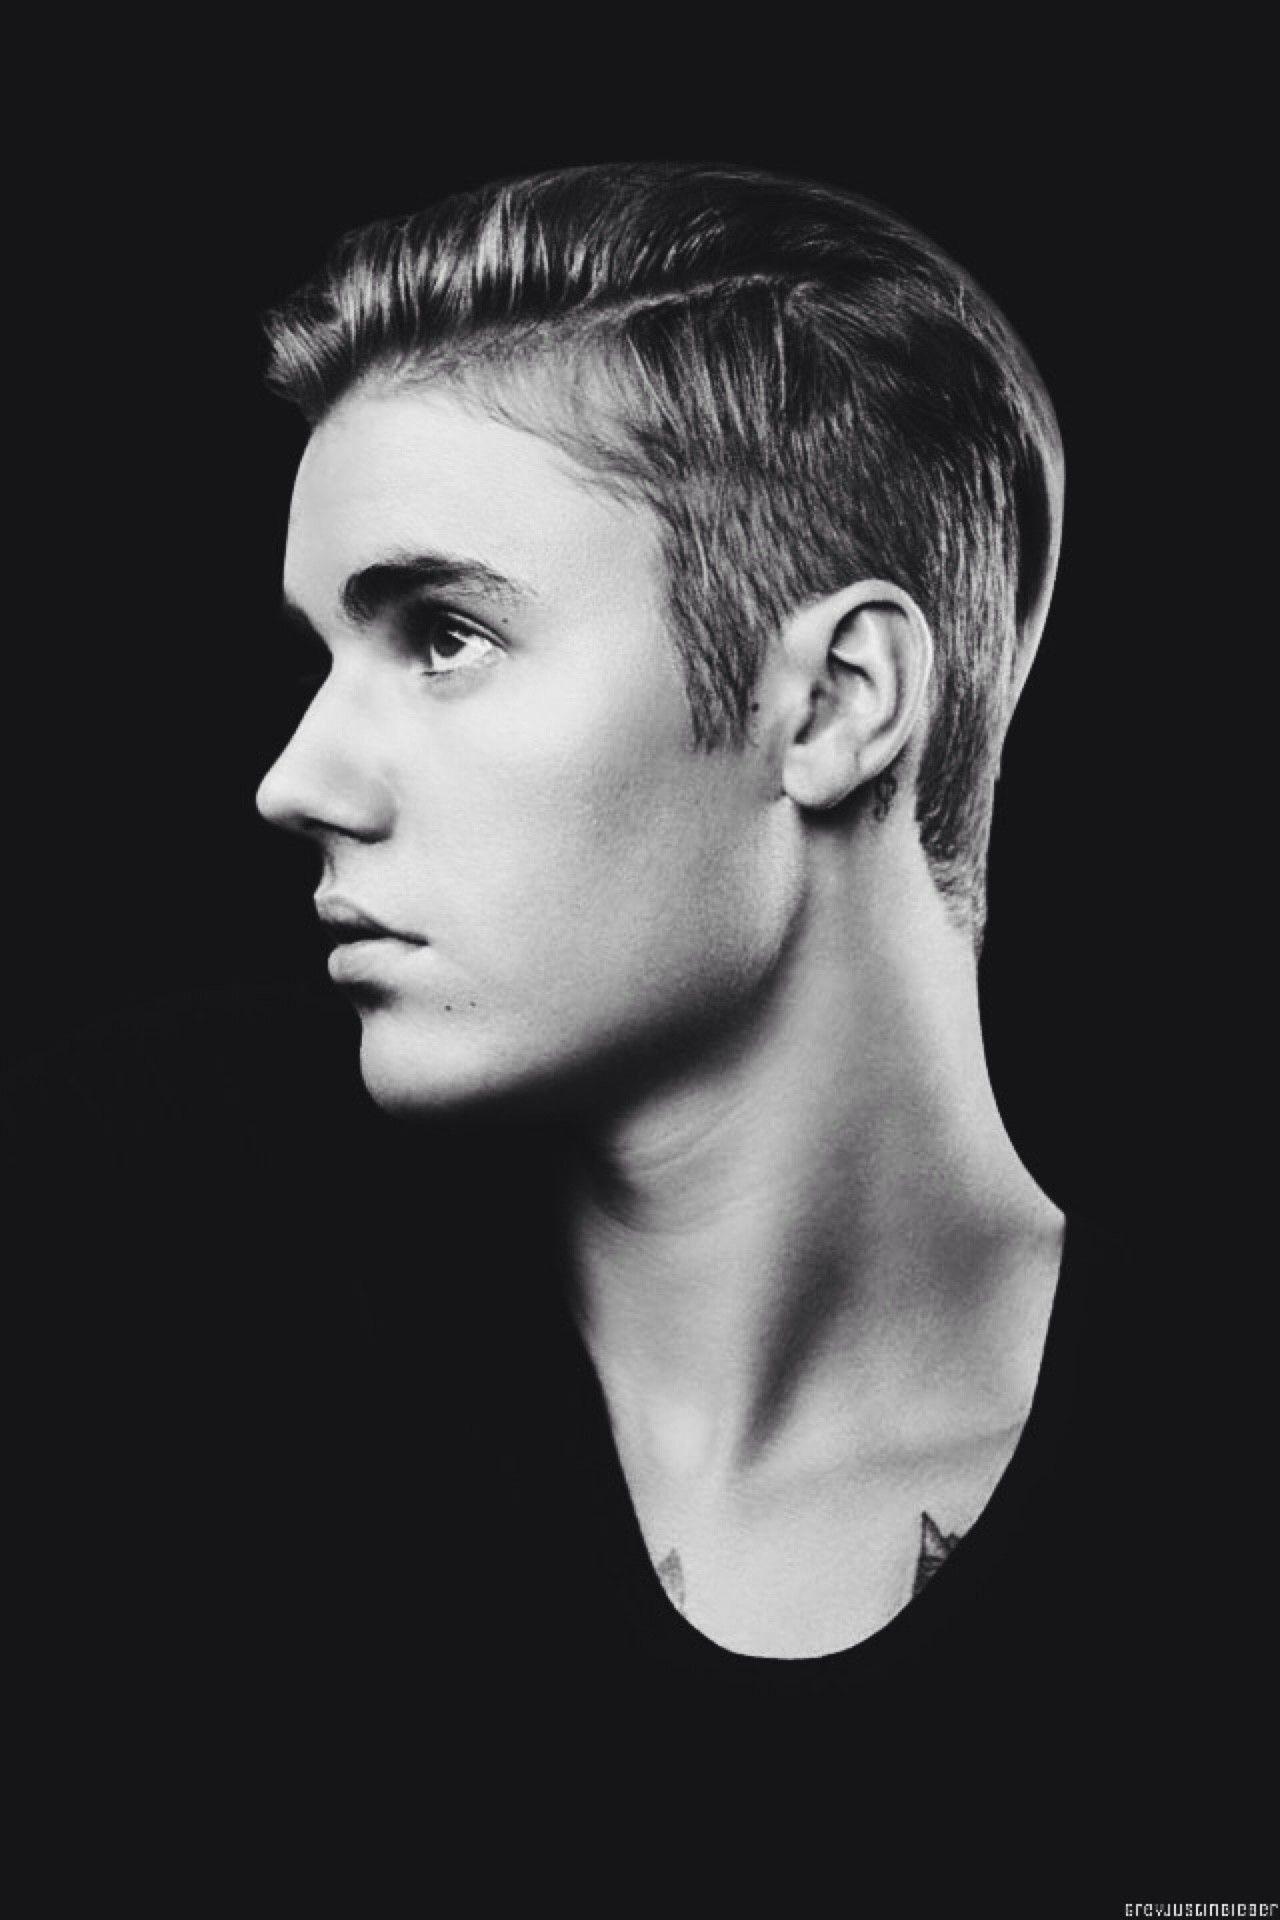 Justin Bieber Iphone Wallpapers Top Free Justin Bieber Iphone Backgrounds Wallpaperaccess